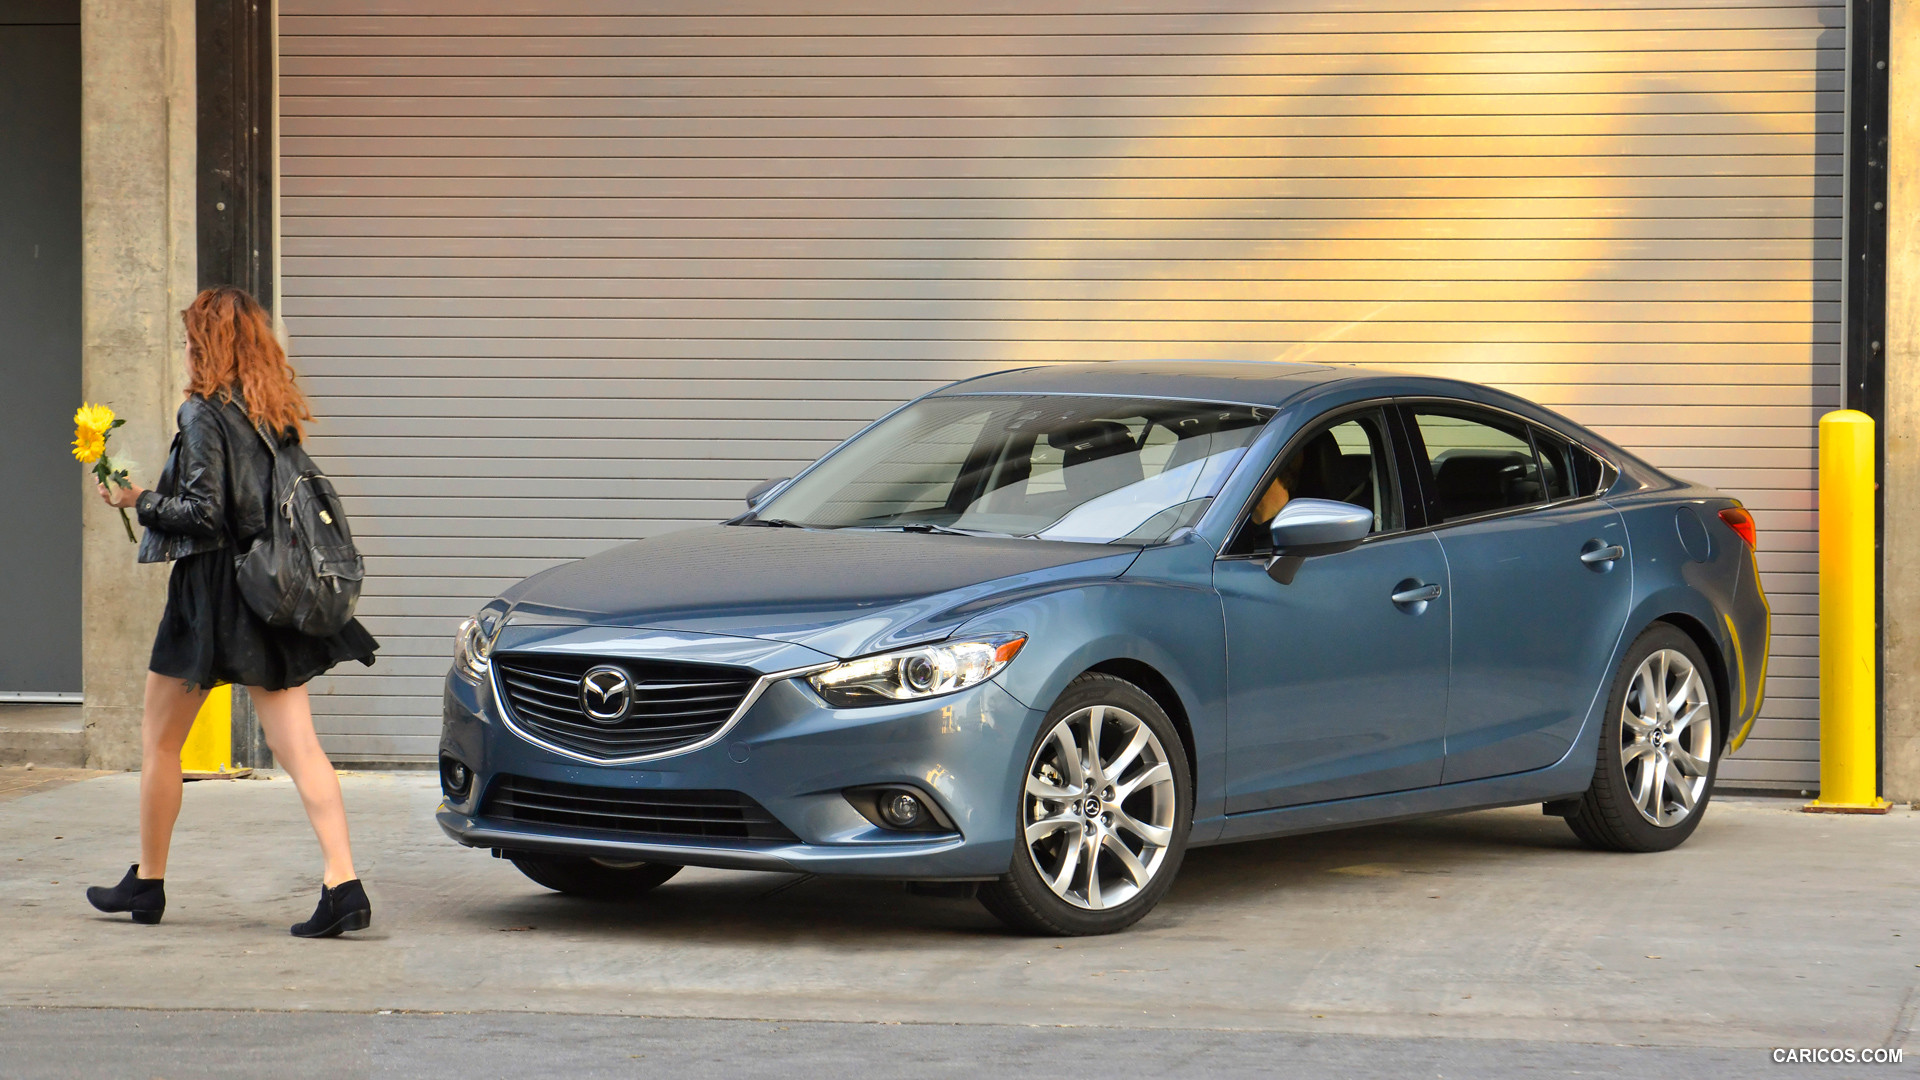 2014 Mazda6 GT - Front, #122 of 179